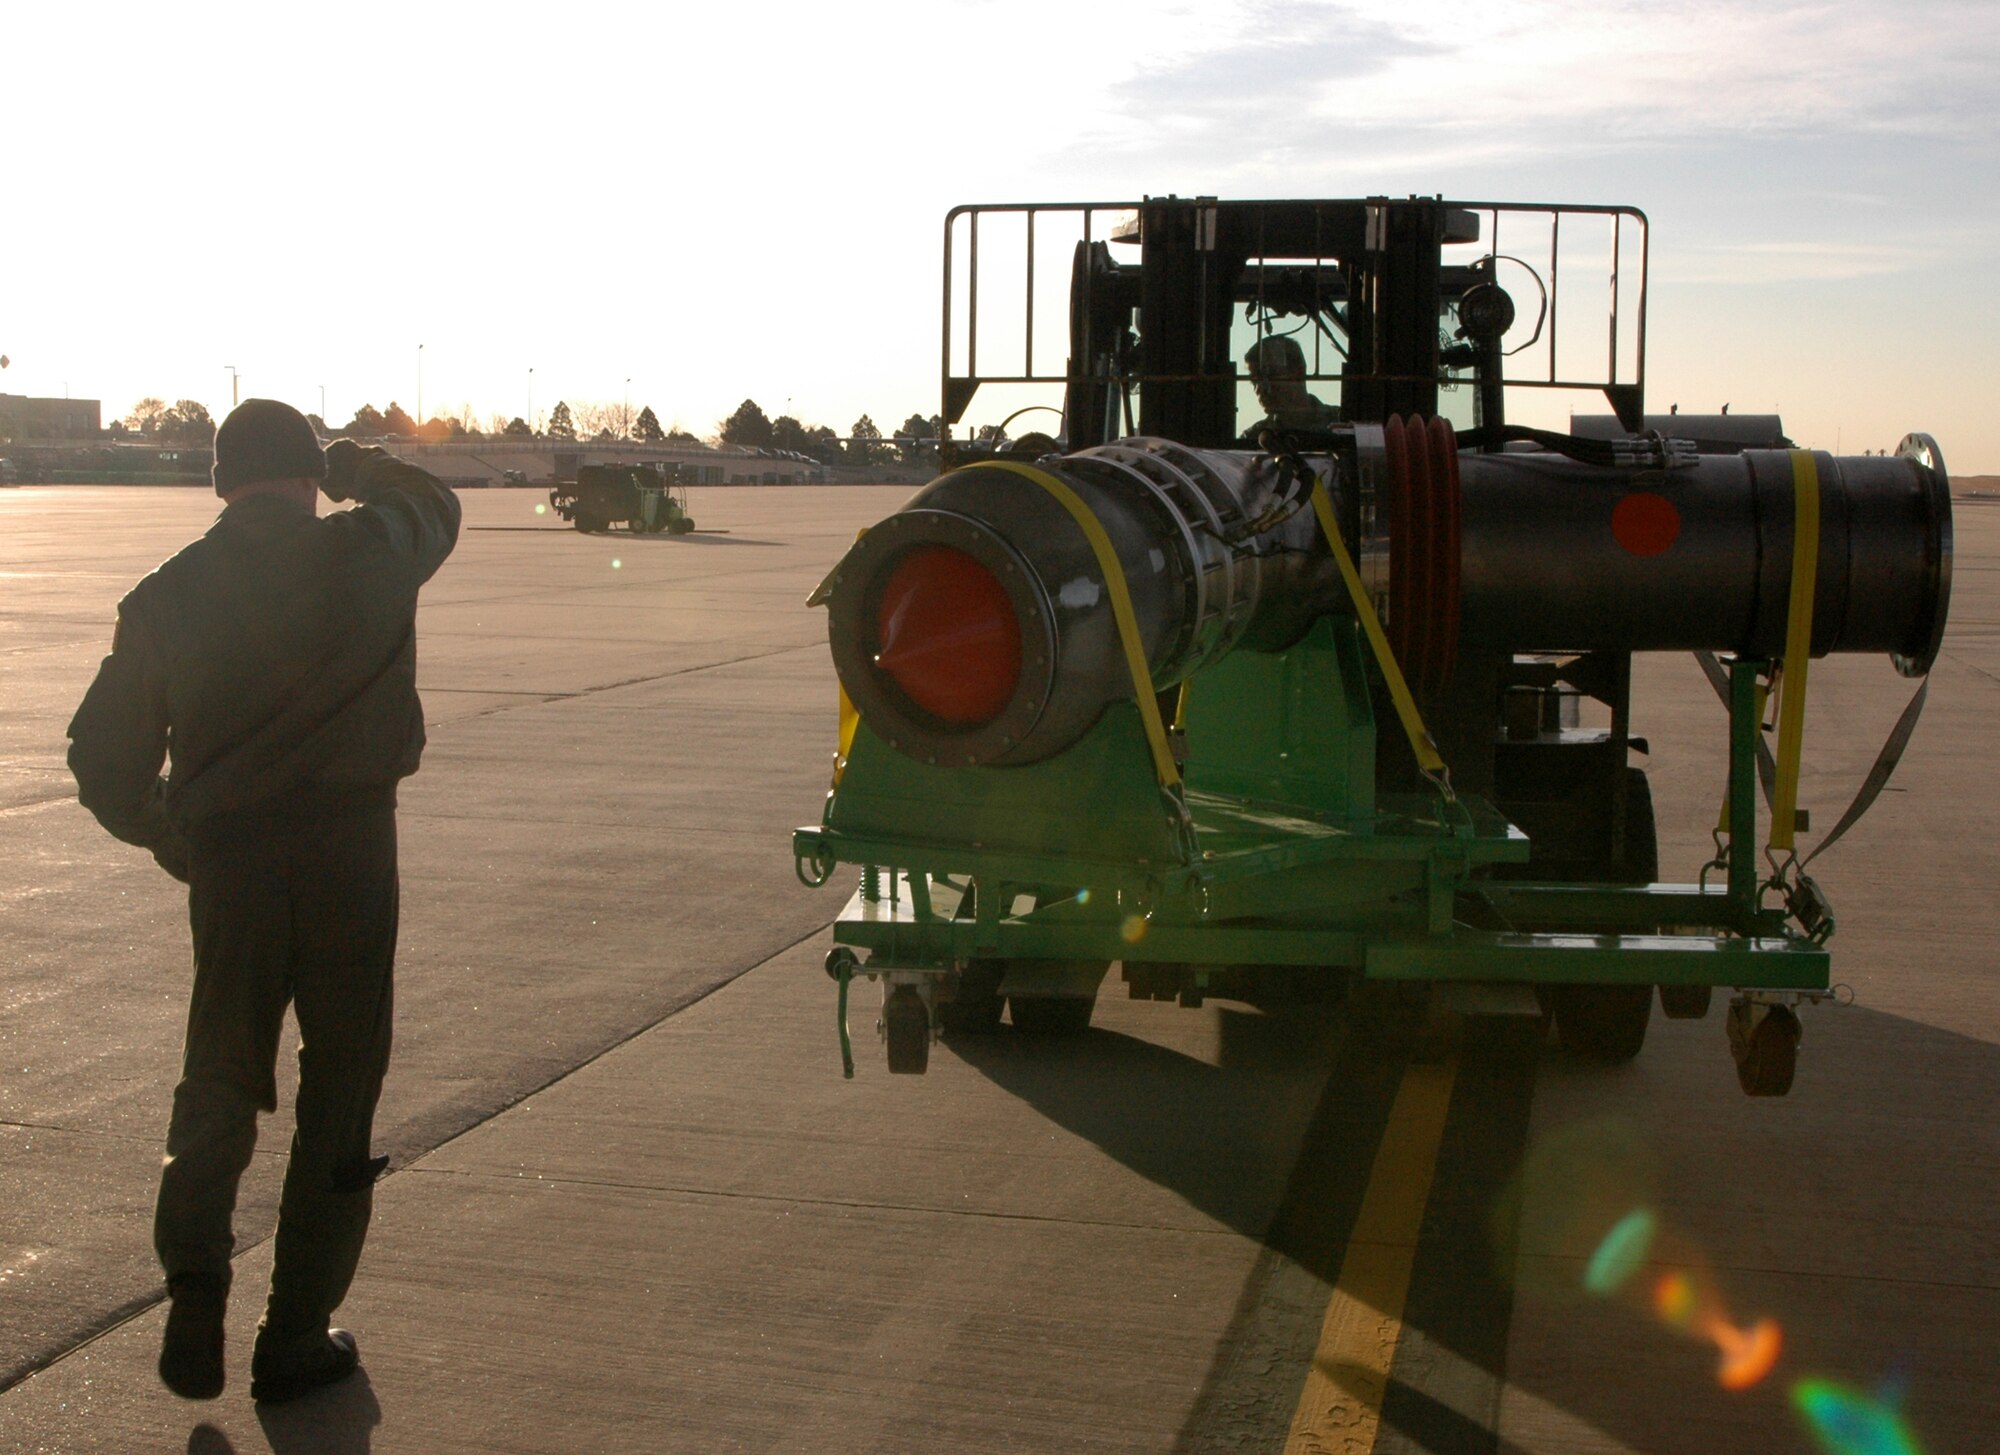 Senior Master Sgt. Derek Ashcraft directs a forklift driver as the nozzle portion of a second-generation Military Airborne Firefighting System unit is offloaded from its C-130 transport March 12, 2009, at Peterson Air Force Base, Colo. Known as MAFFS II, the unit augments the current MAFFS system, but is portable and self contained, making it more cost effective. Over time, MAFFS II will replace existing MAFFS units throughout the military's firefighting fleet supported by three Air National Guard wings as well as the Air Force Reserve's 302nd Airlift Wing at Peterson. Sergeant Ashcraft is a loadmaster with the 731st Airlift Squadron. (U.S. Air Force photo/Senior Airman Stephen Collier)